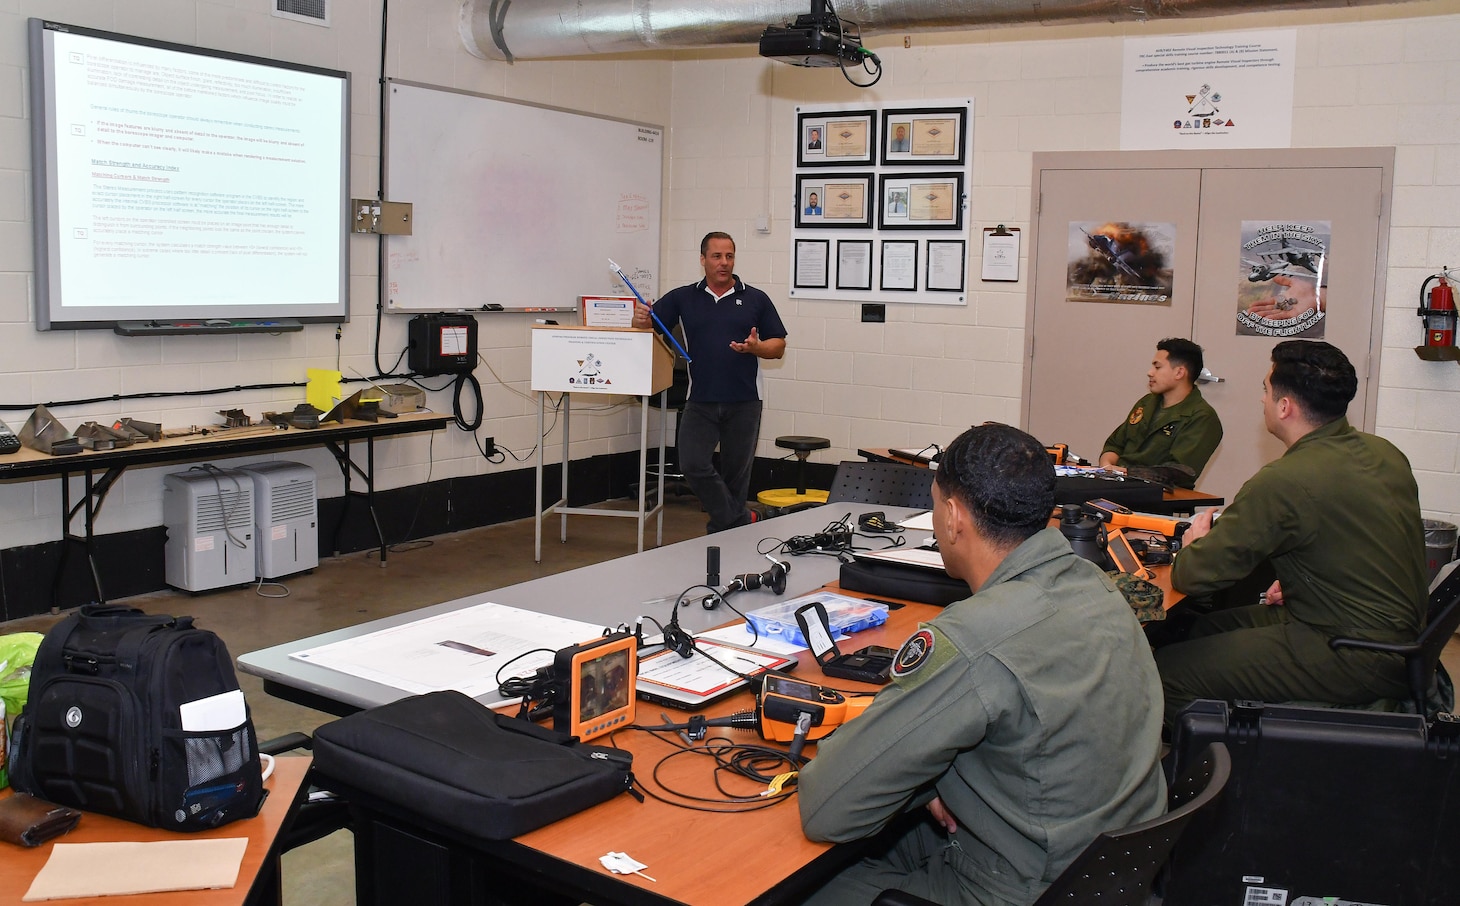 Marines assigned to Marine Attack Squadron (VMA) 223 engage in classroom discussion March 6 during the F402 Engine Tier 5 Remote Visual Inspection (RVI) Inspector Rating certification course at Fleet Readiness Center East.